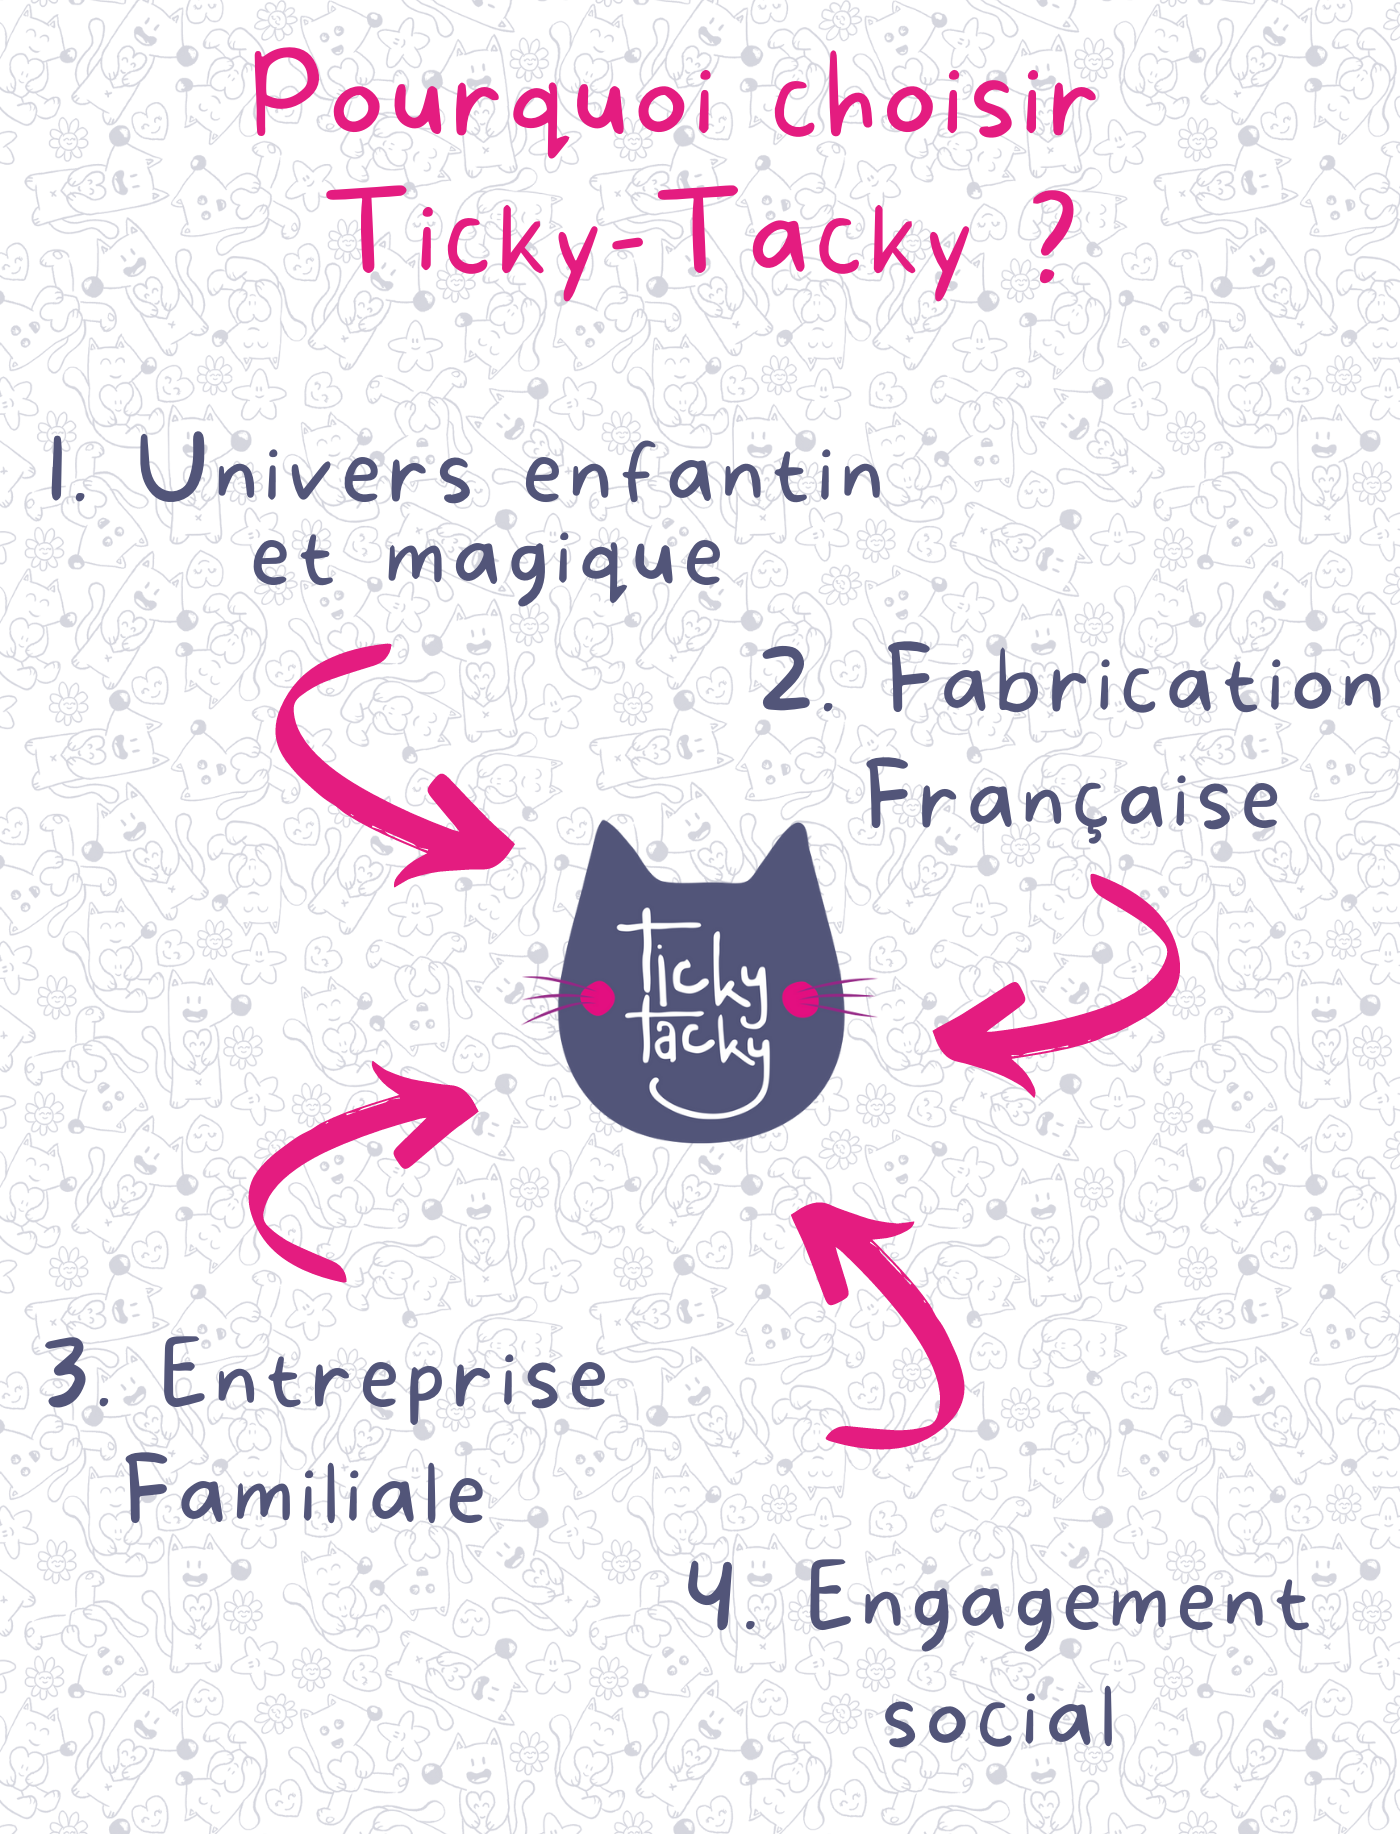 06 - Pourquoi choisir Ticky-Tacky.png